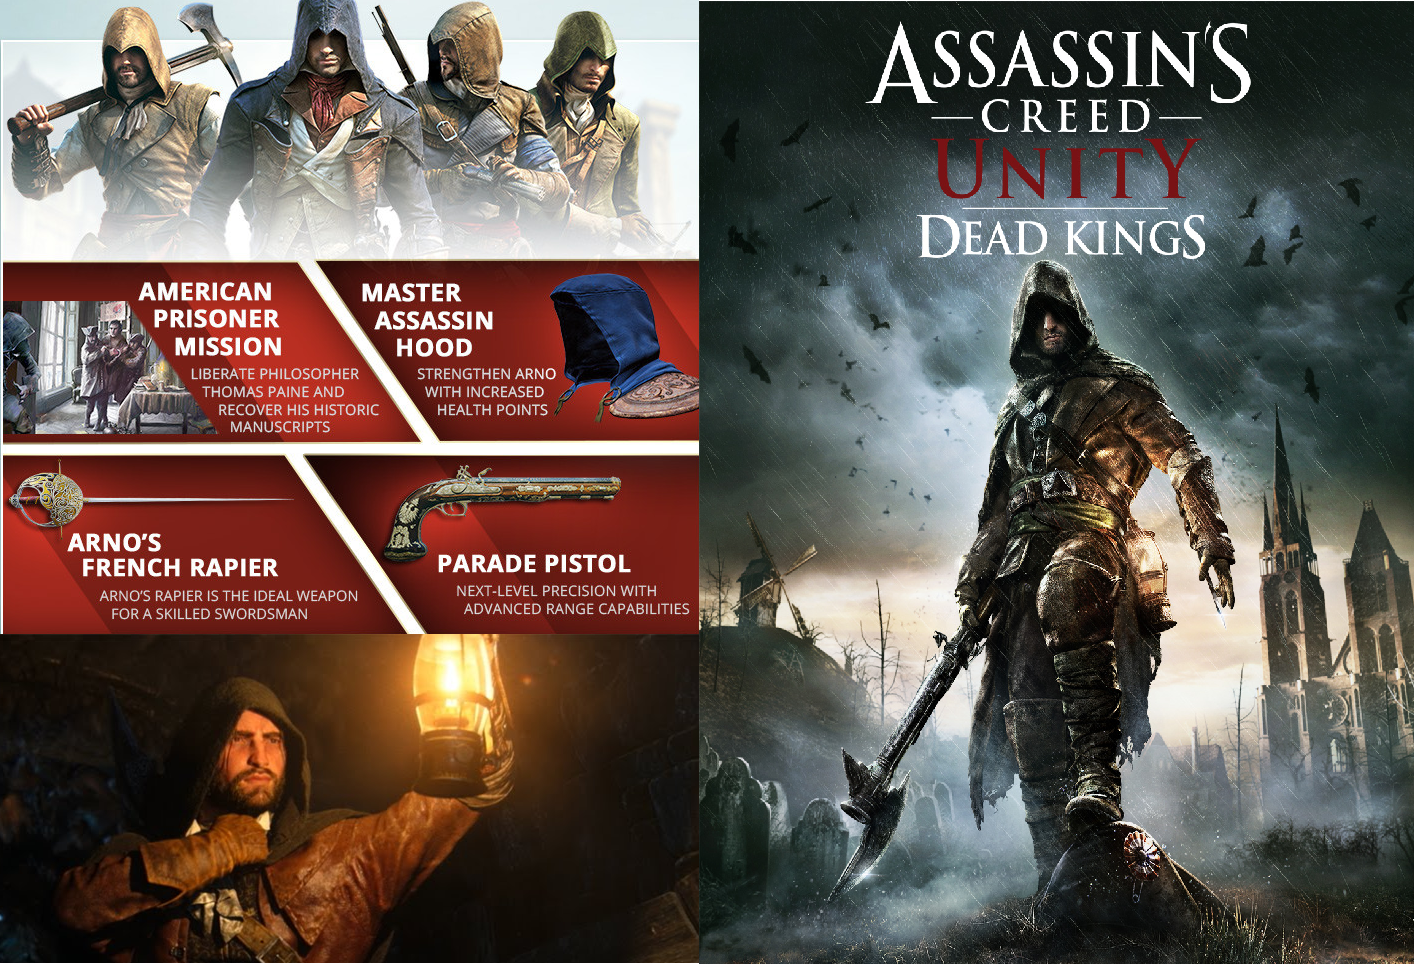 Assassin's Creed Unity Dead Kings box cover